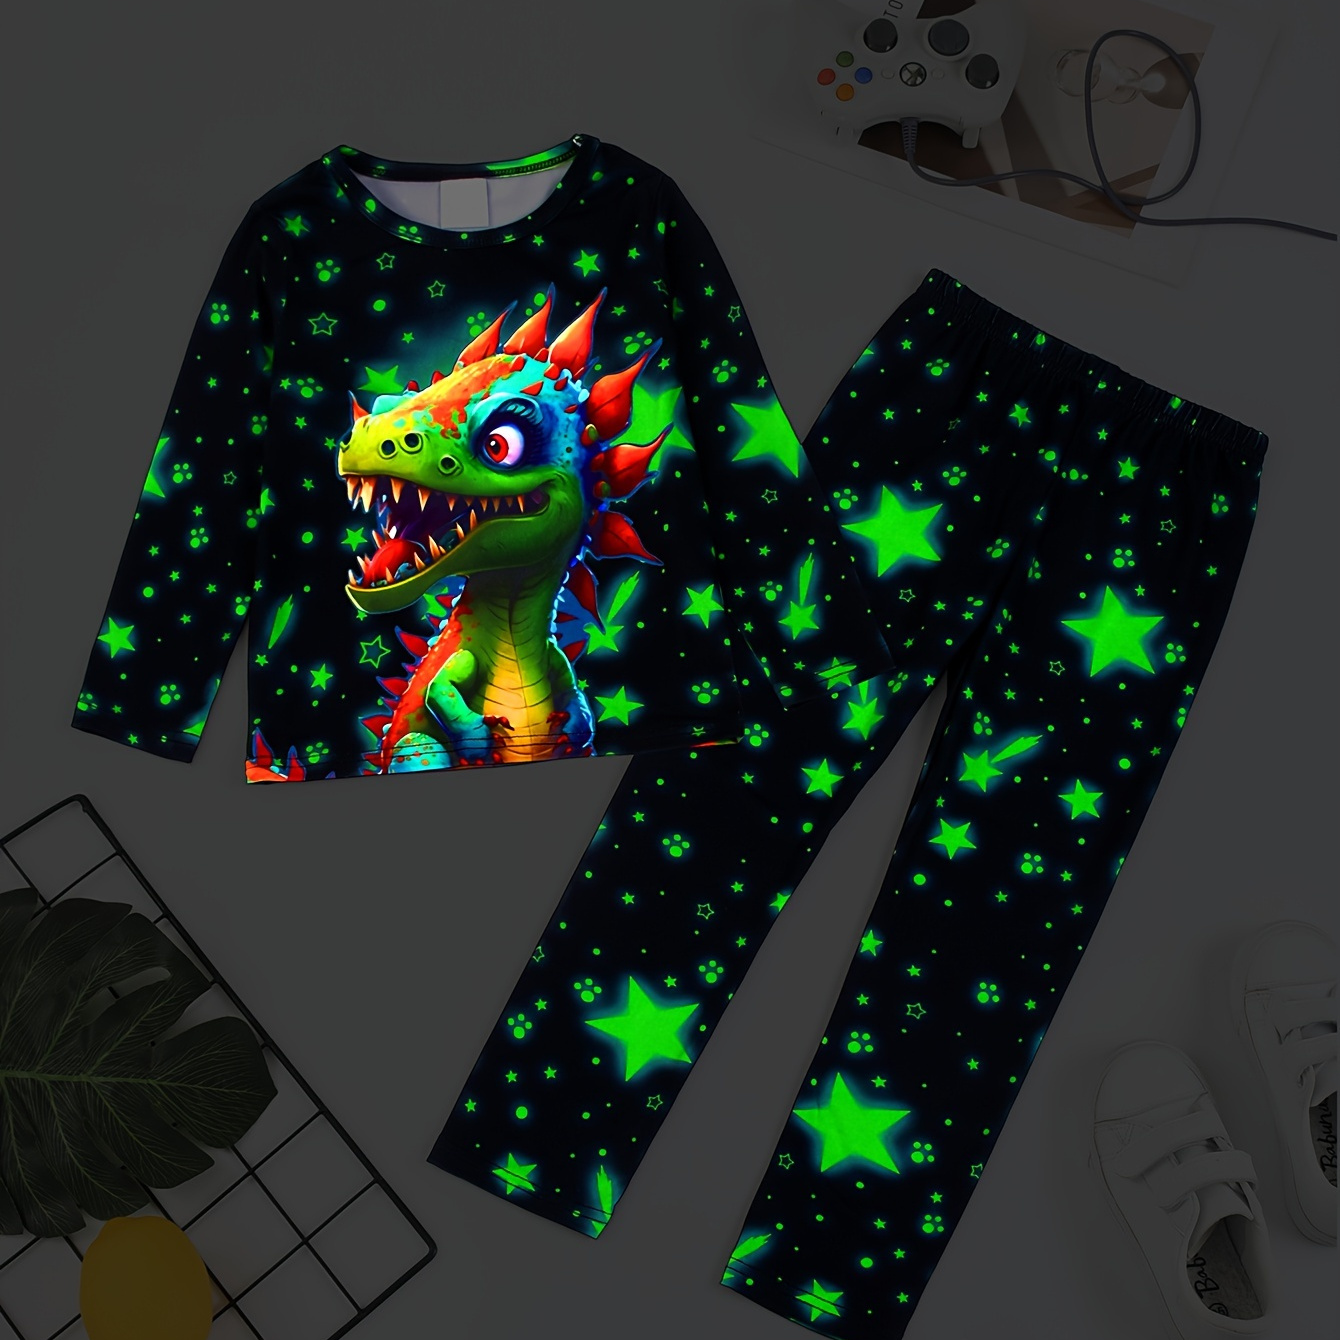 

2-piece Long Pants Digital Printed Dinosaur Thermal, Base, Underwear, Air-conditioned Clothing, Casual, Skin-friendly Close-fitting Comfort